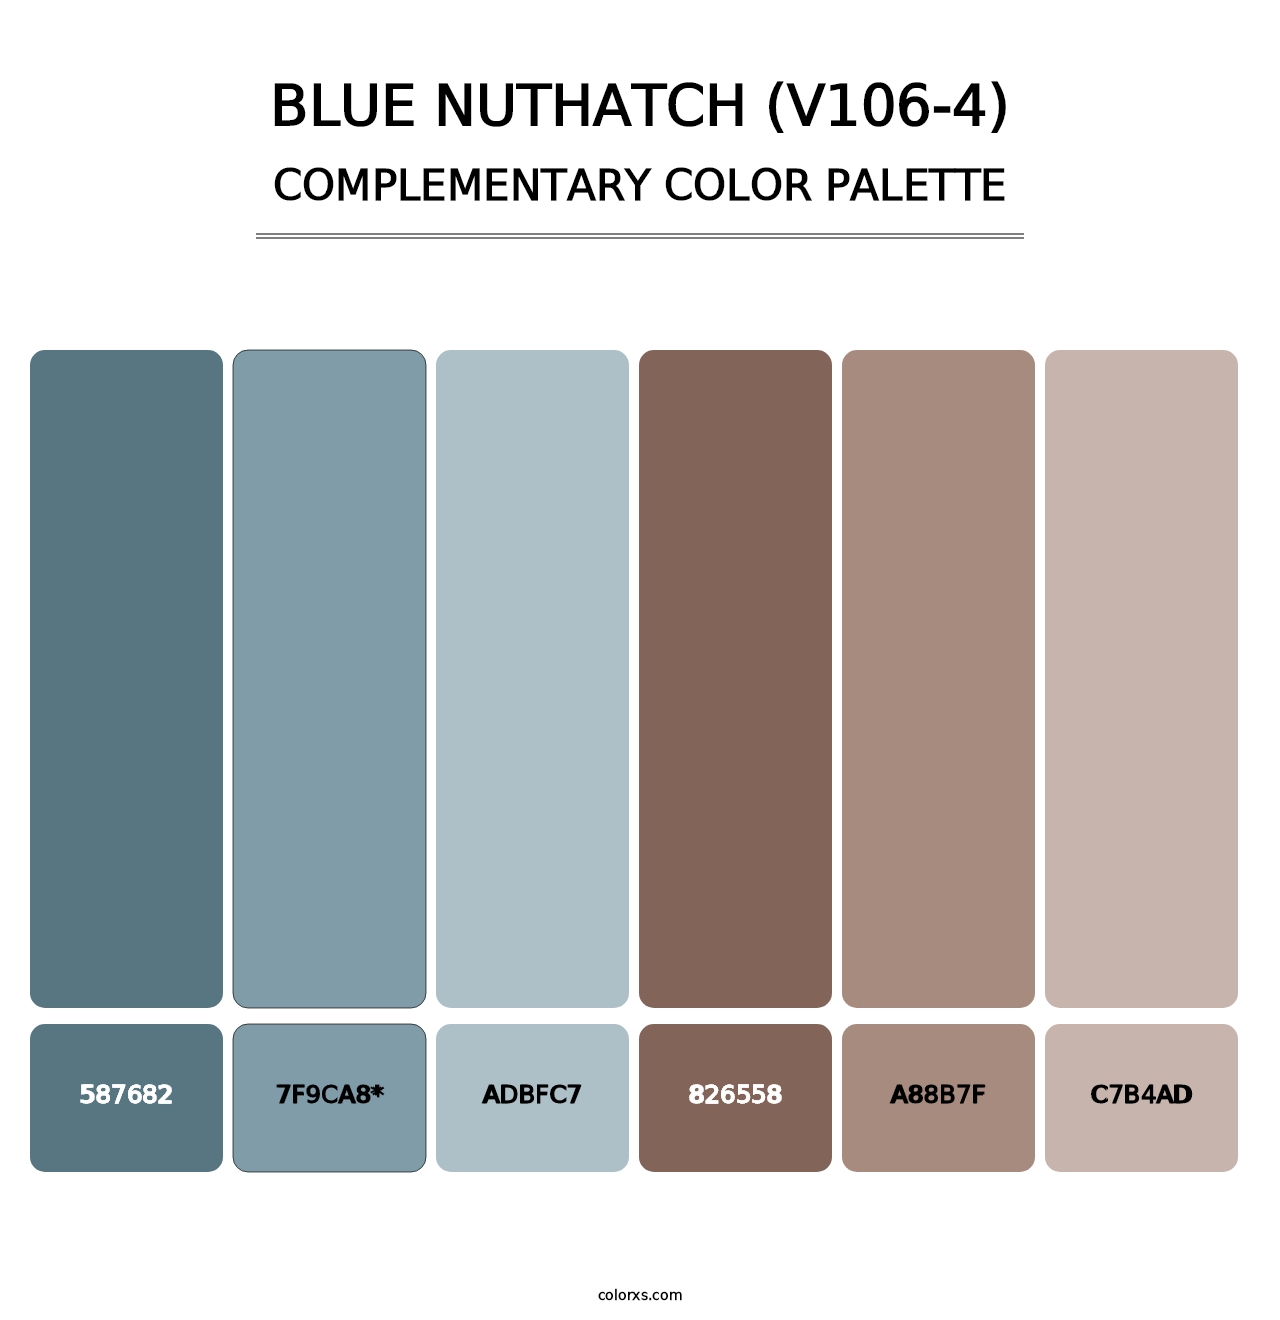 Blue Nuthatch (V106-4) - Complementary Color Palette